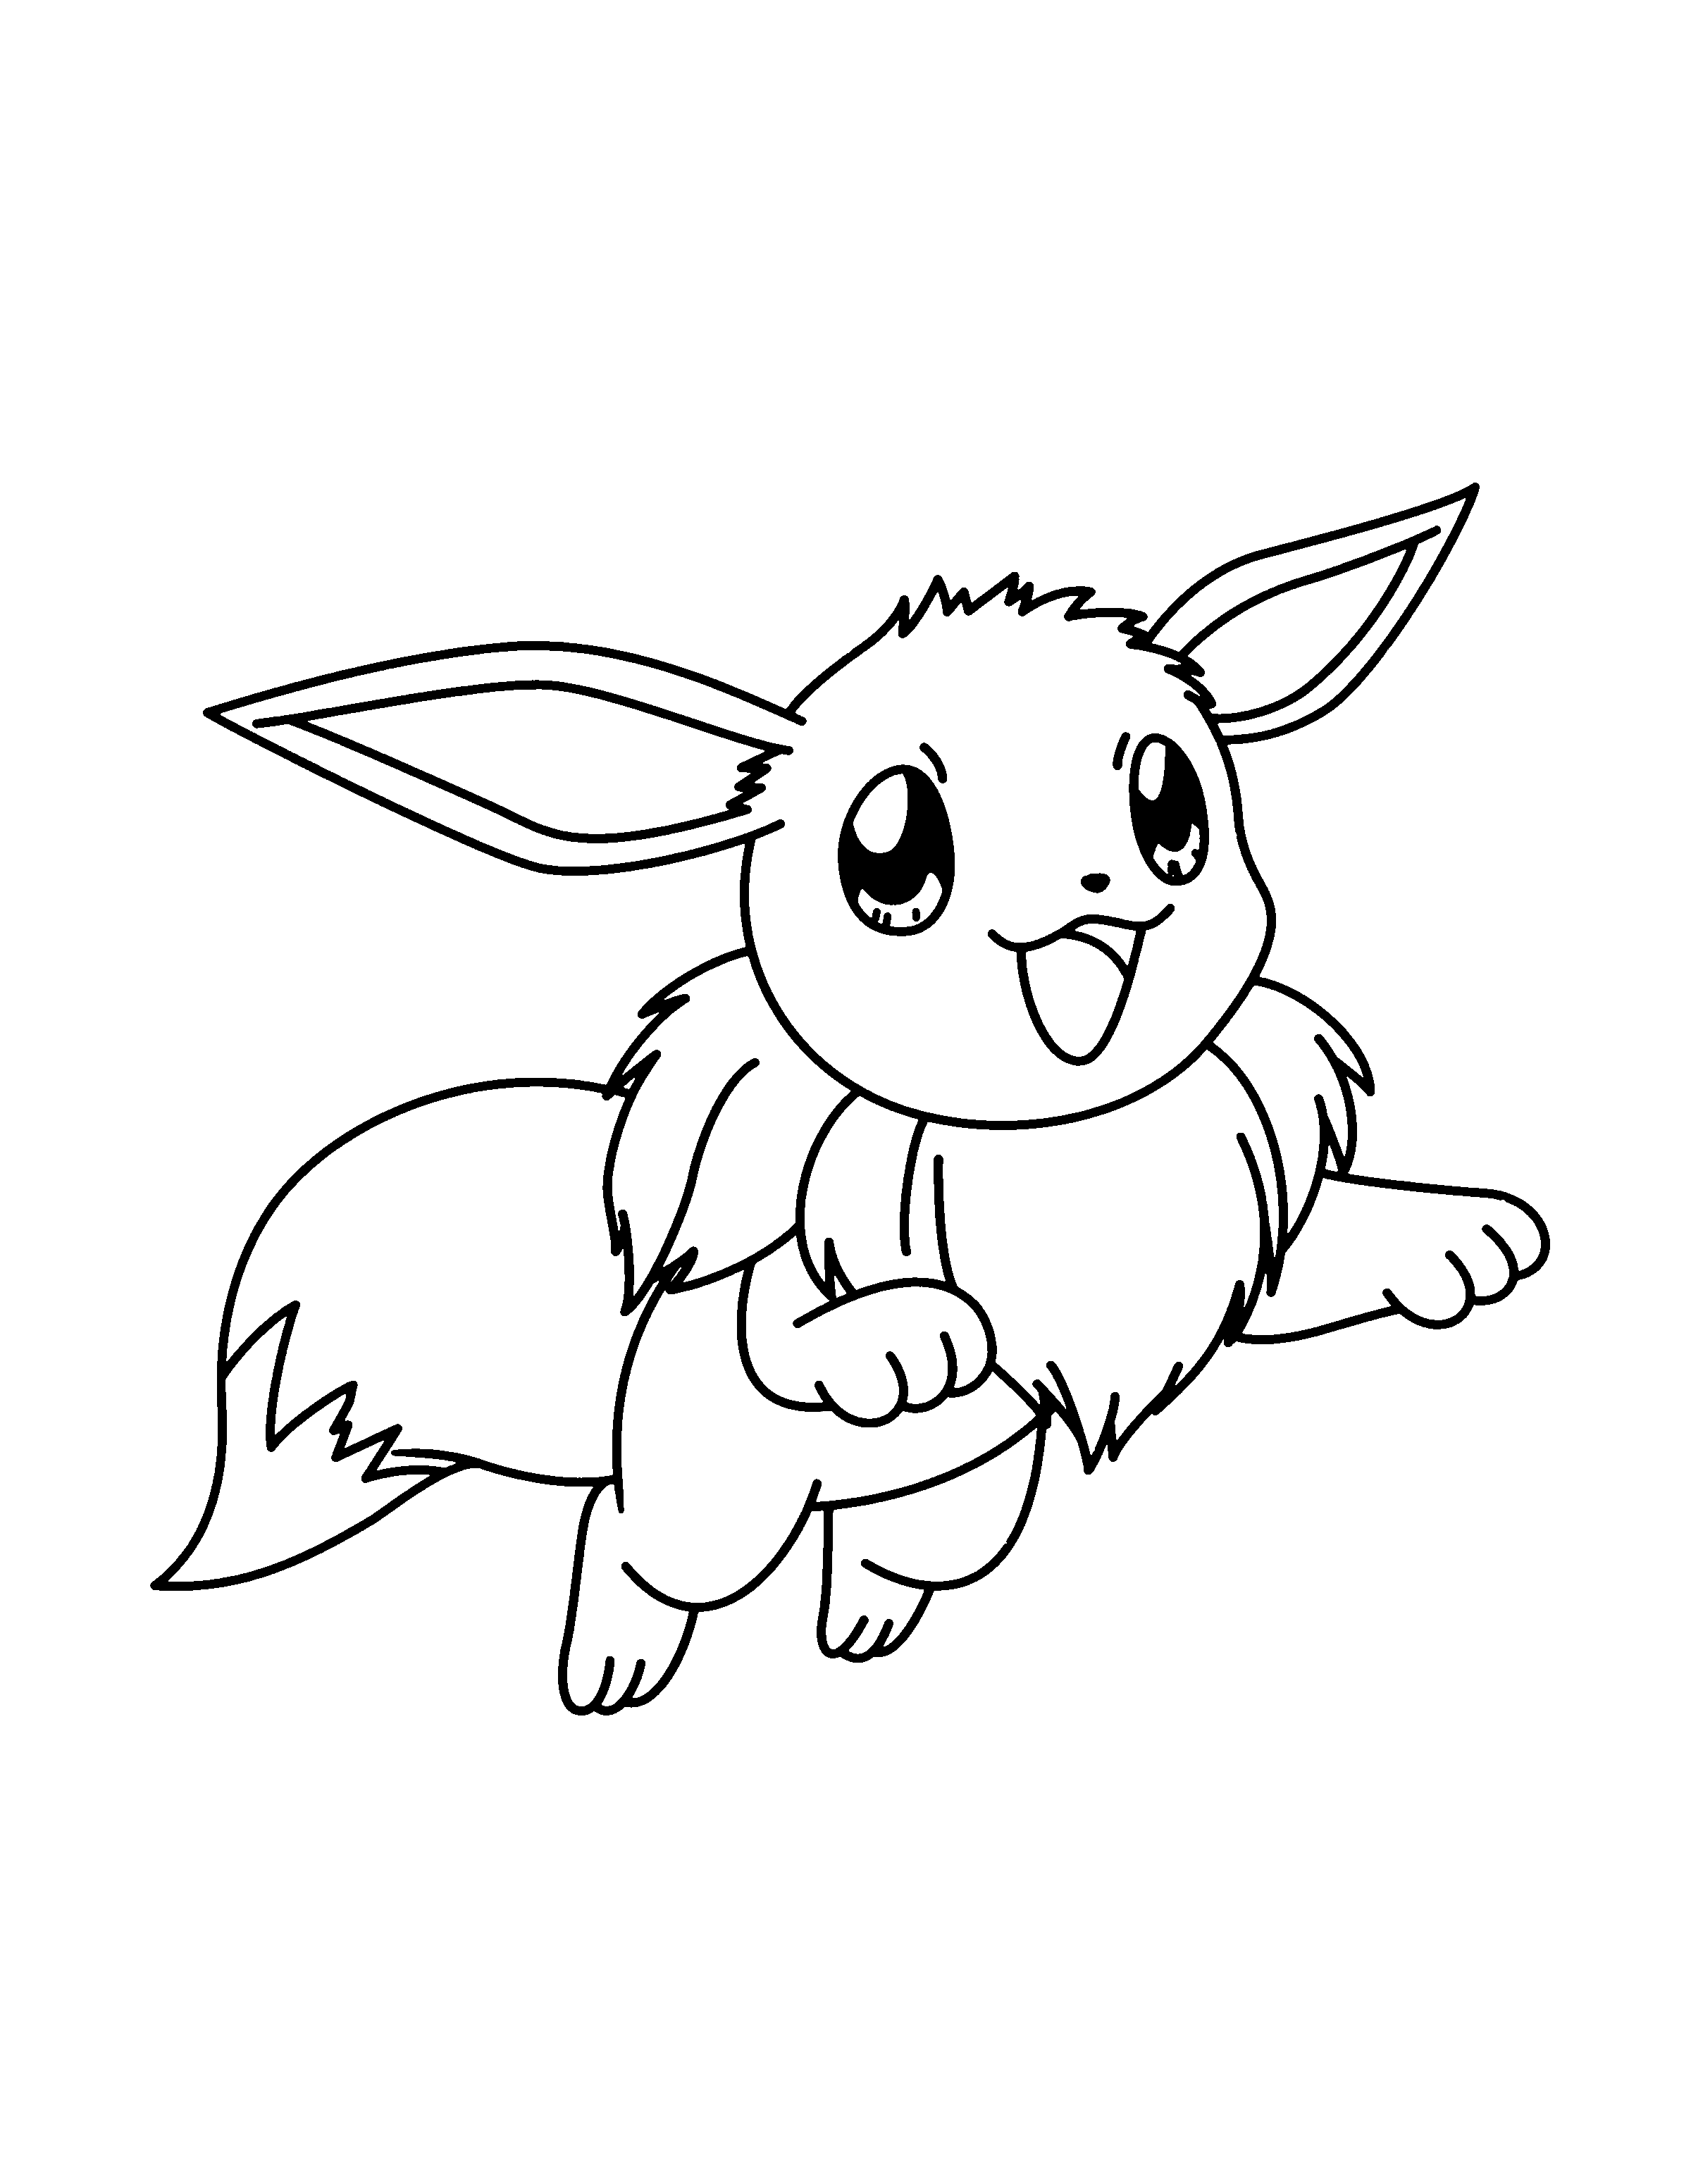 Eevee Coloring Pages Pokemon advanced coloring